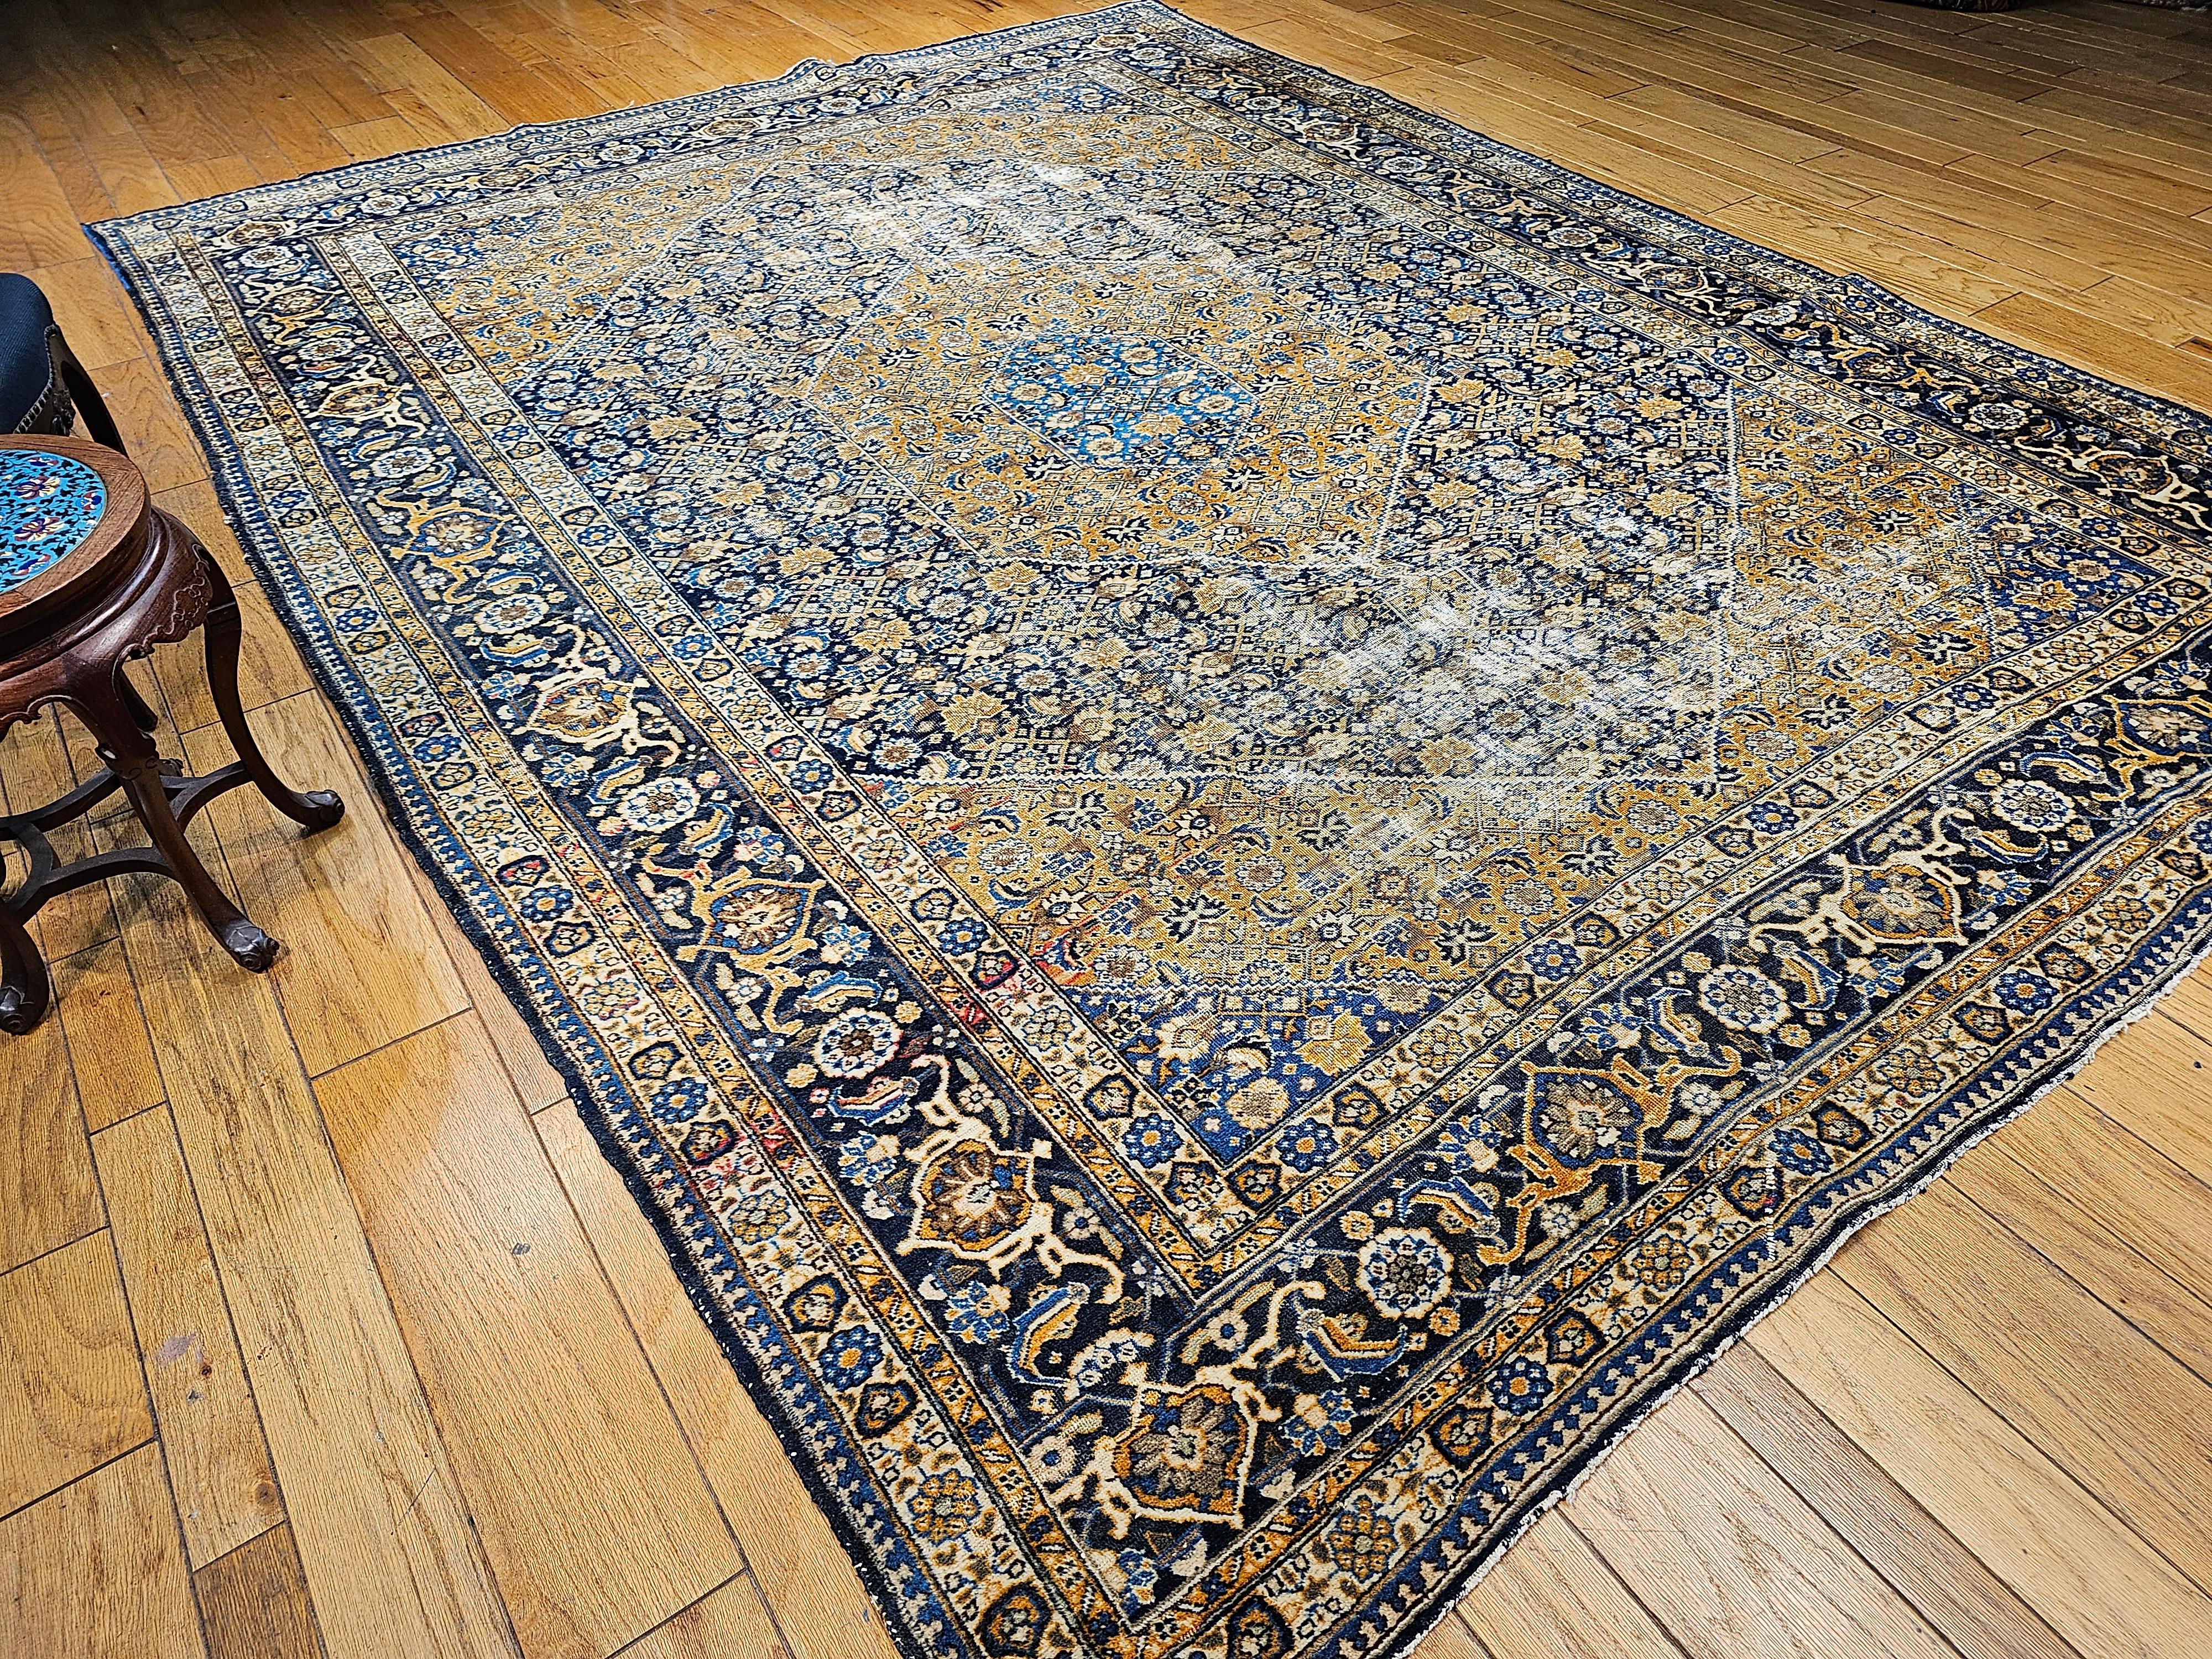 Vintage Persian Tabriz in Geometric Mahi Pattern in French Blue, Navy, Camel For Sale 6